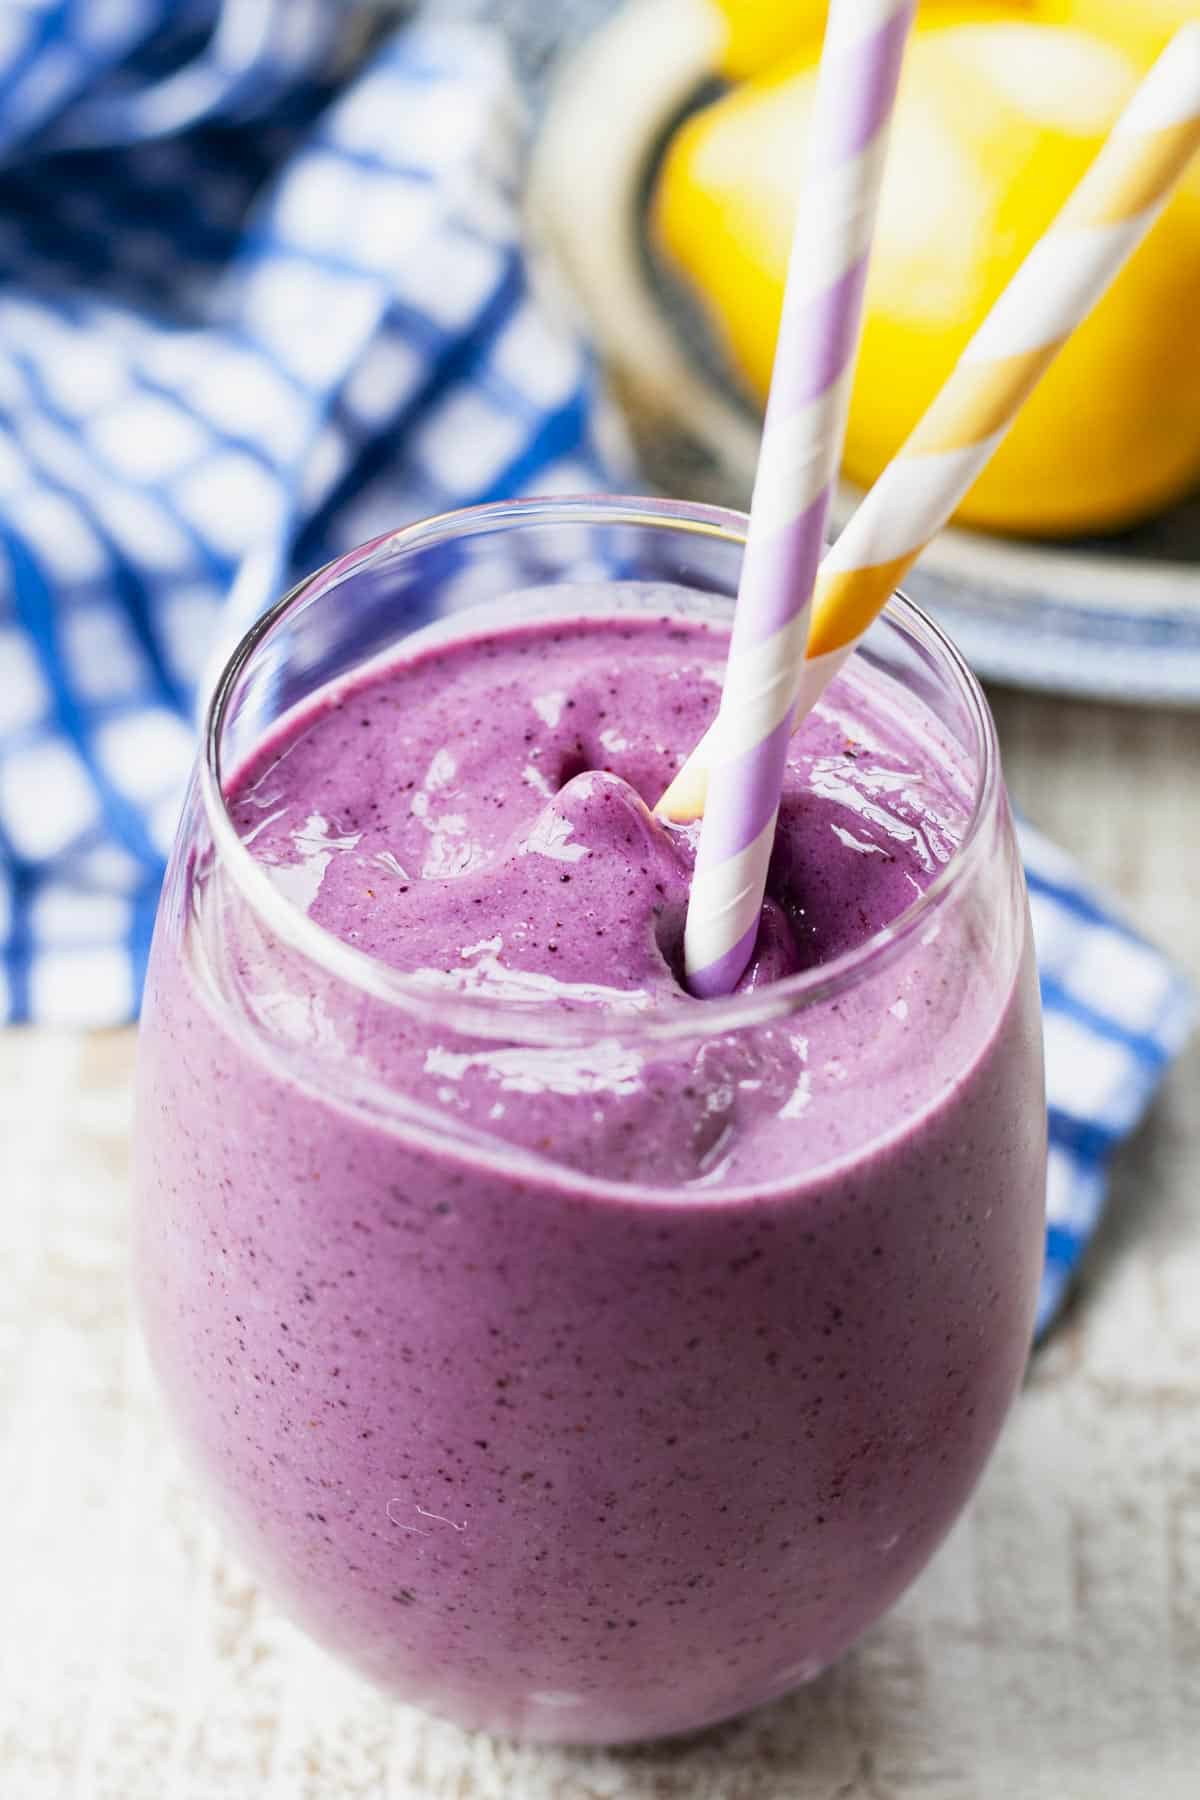 Close up shot of two straws in a blueberry banana smoothie with greek yogurt and milk.